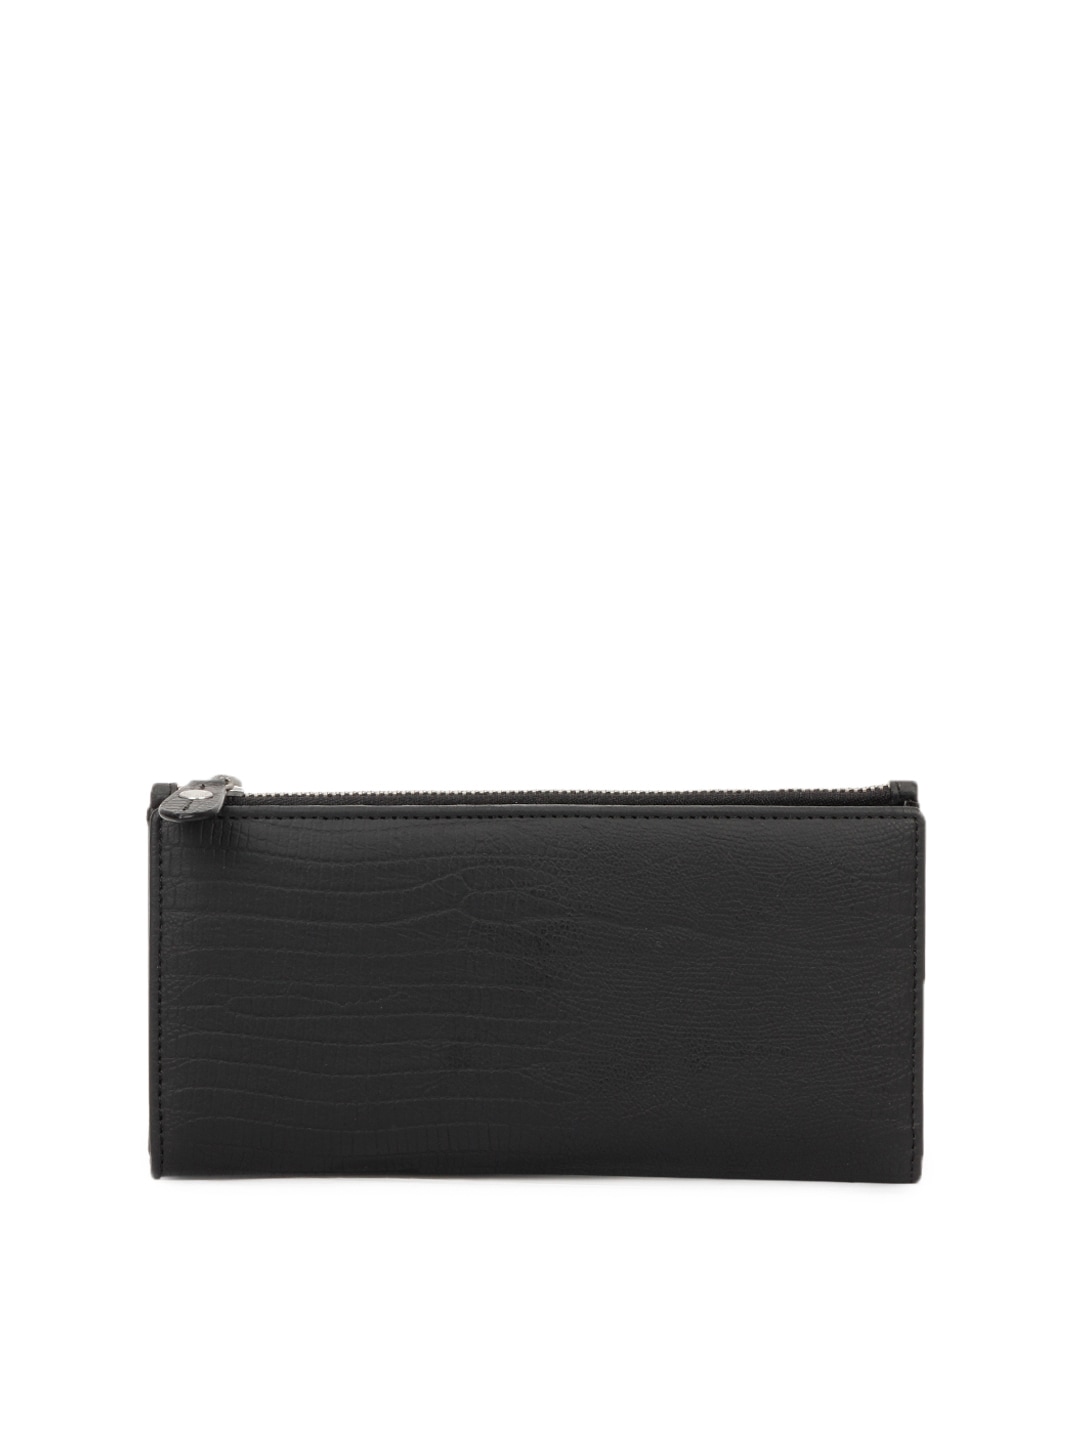 French Connection Women Black Wallet